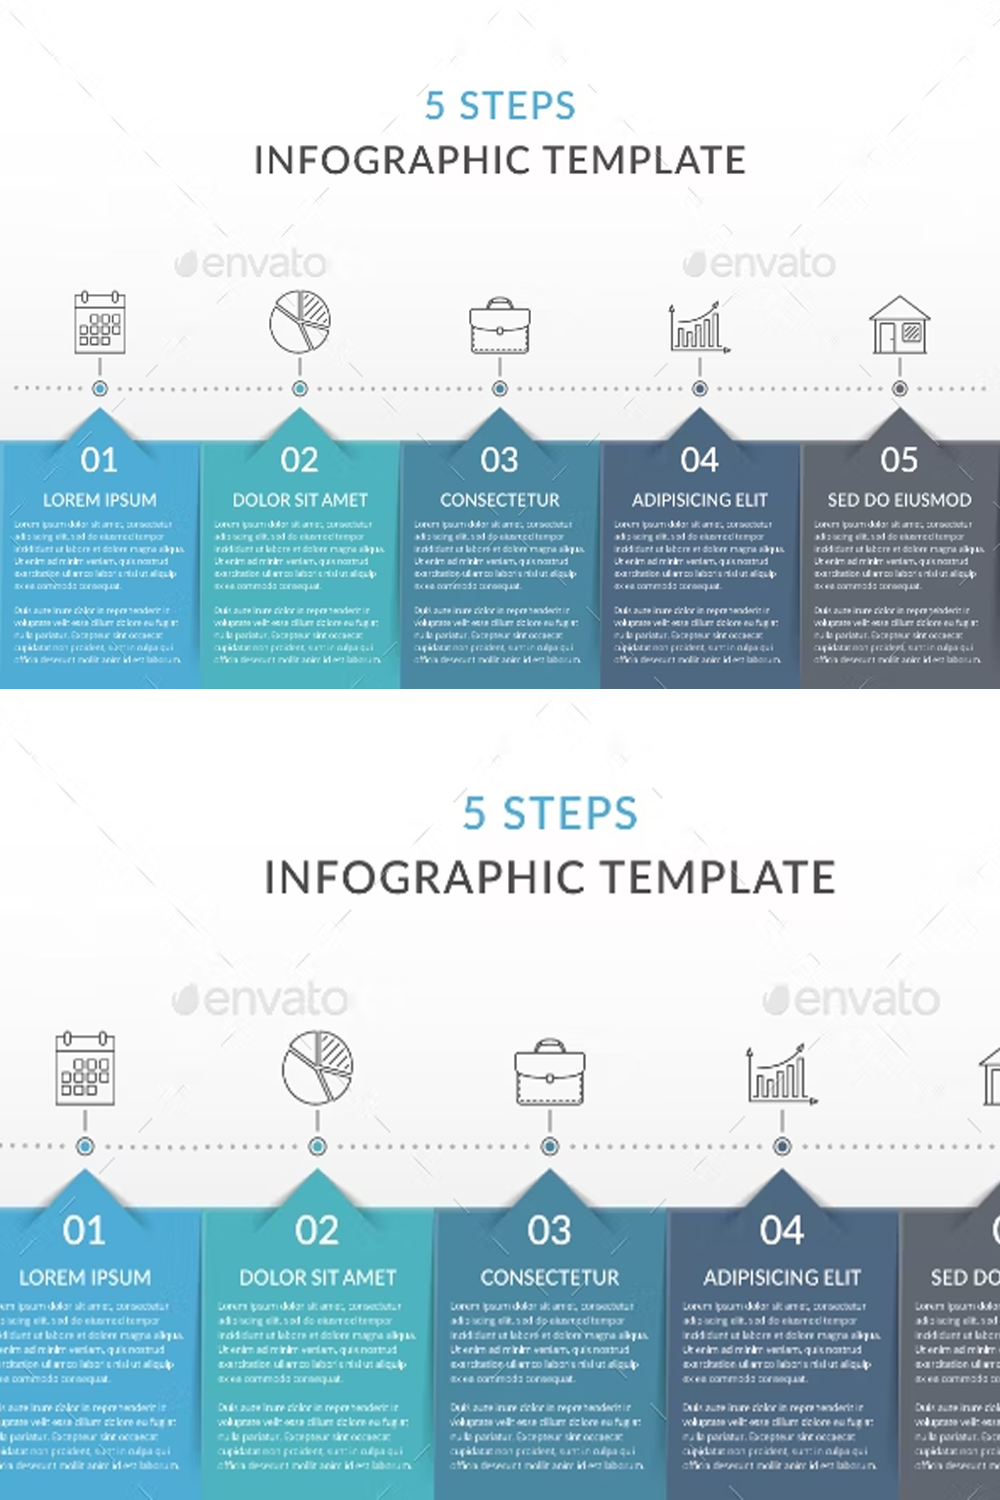 Illustrations 5 steps infographic template of pinterest.